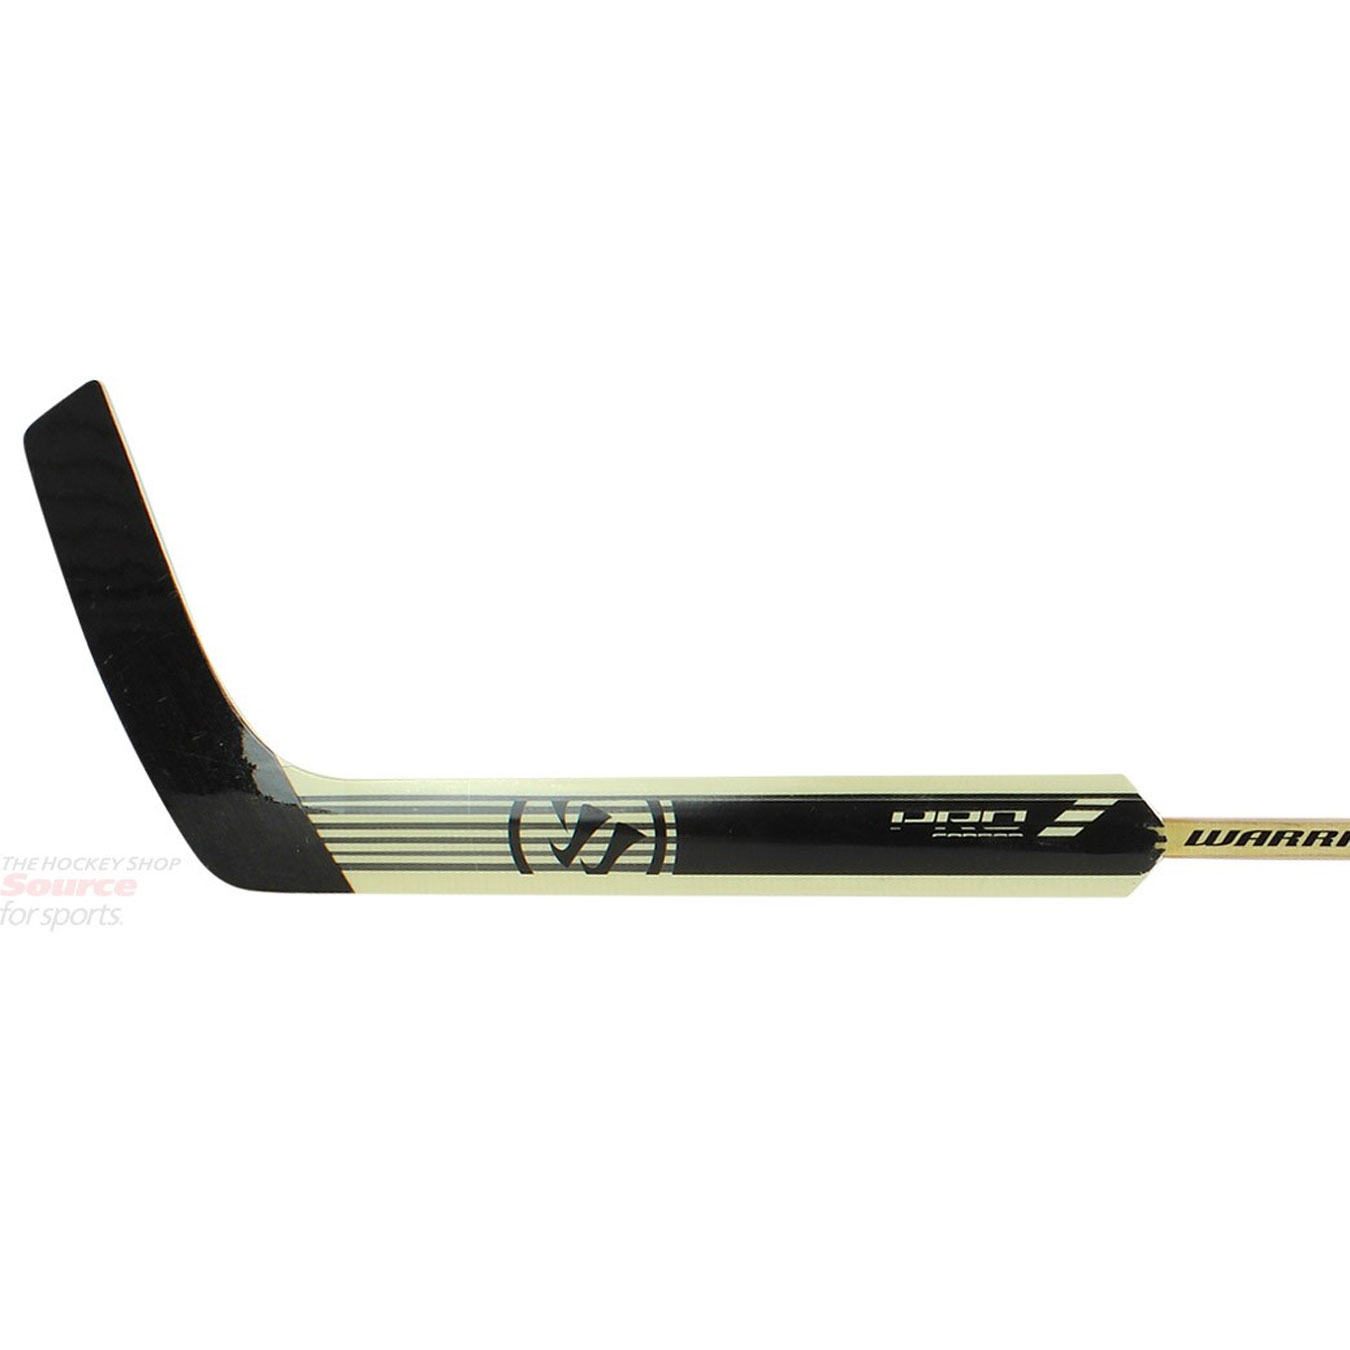   Warrior Swagger Pro Carbon SR